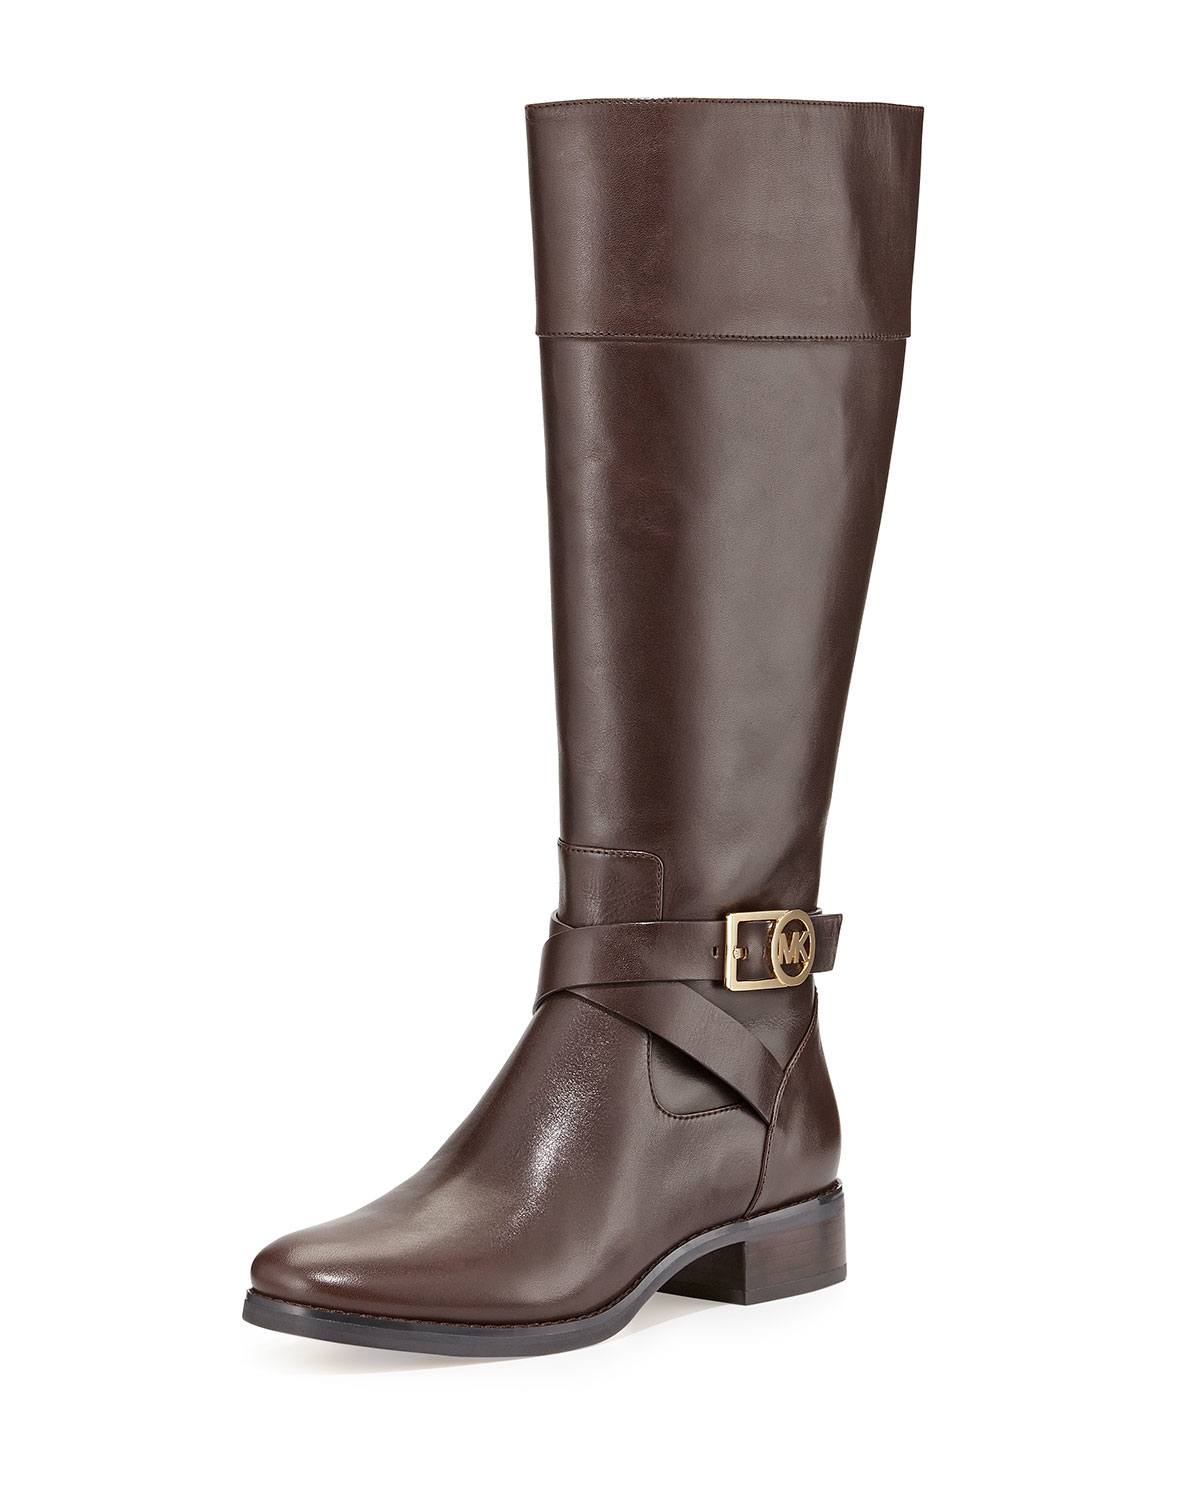 Michael michael kors Bryce Leather Riding Boot in Brown | Lyst